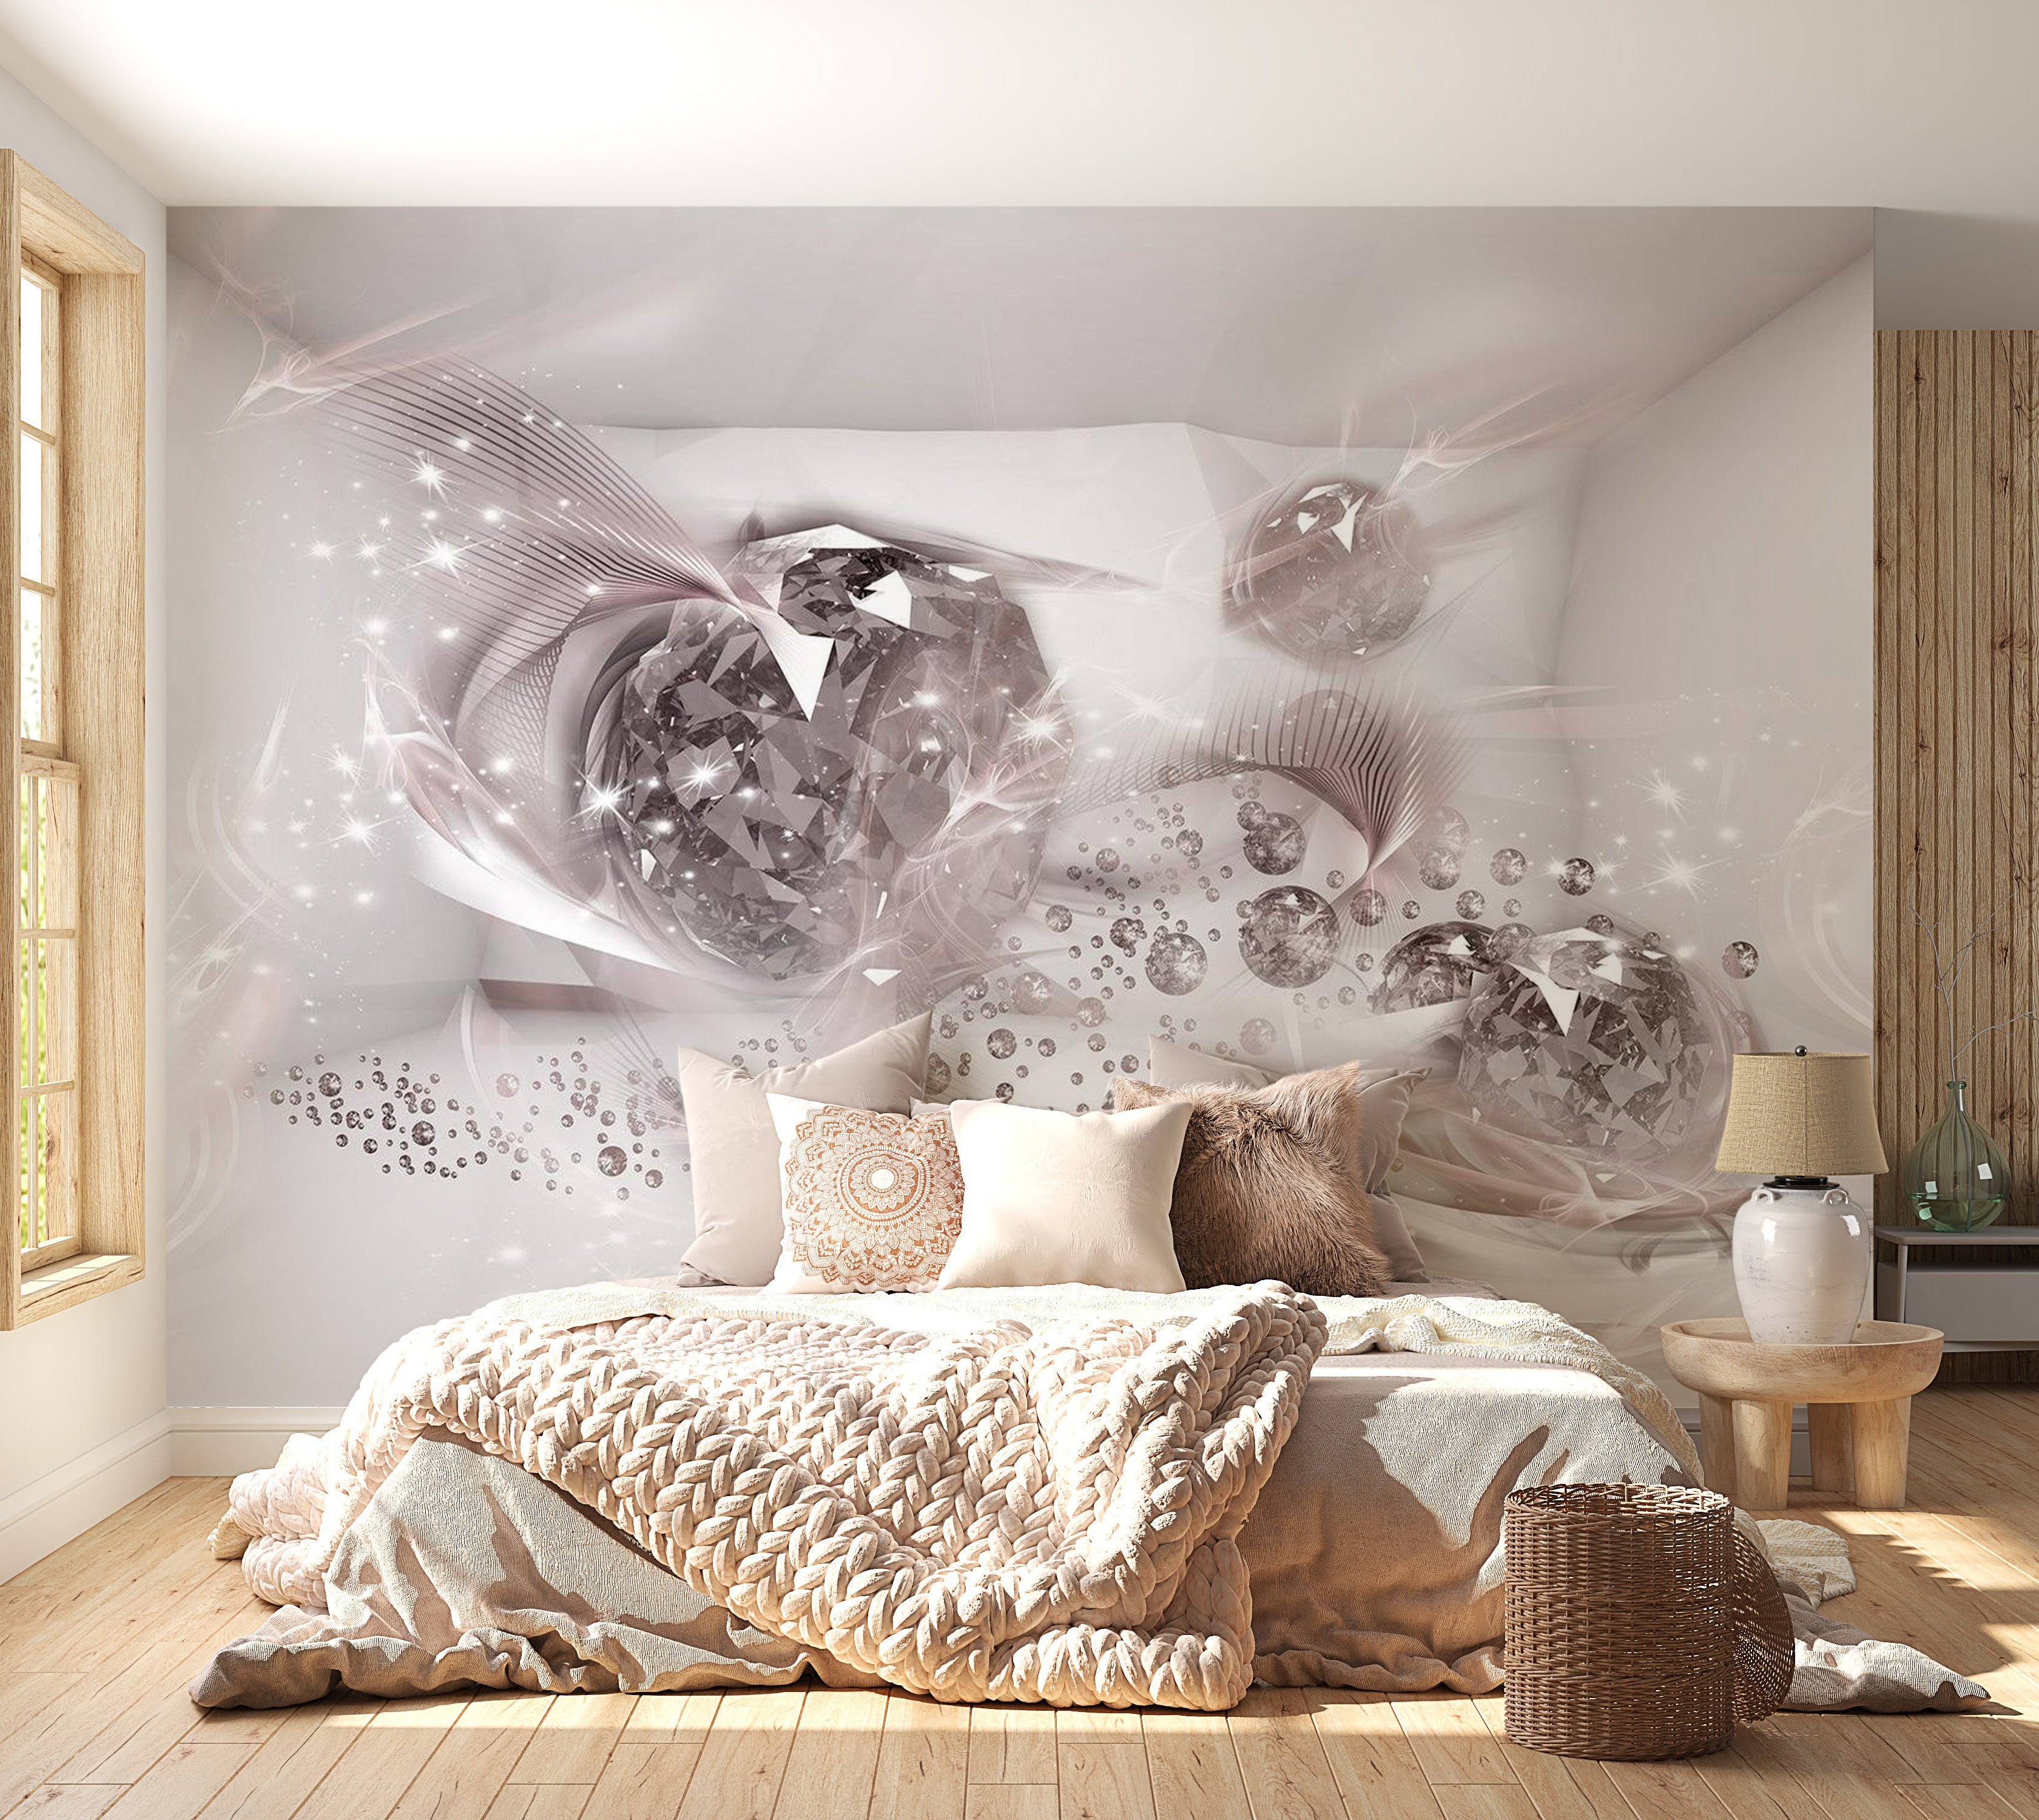 Peel & Stick Glam Wall Mural - Lovely Autumn Violet - Removable Wall Decals